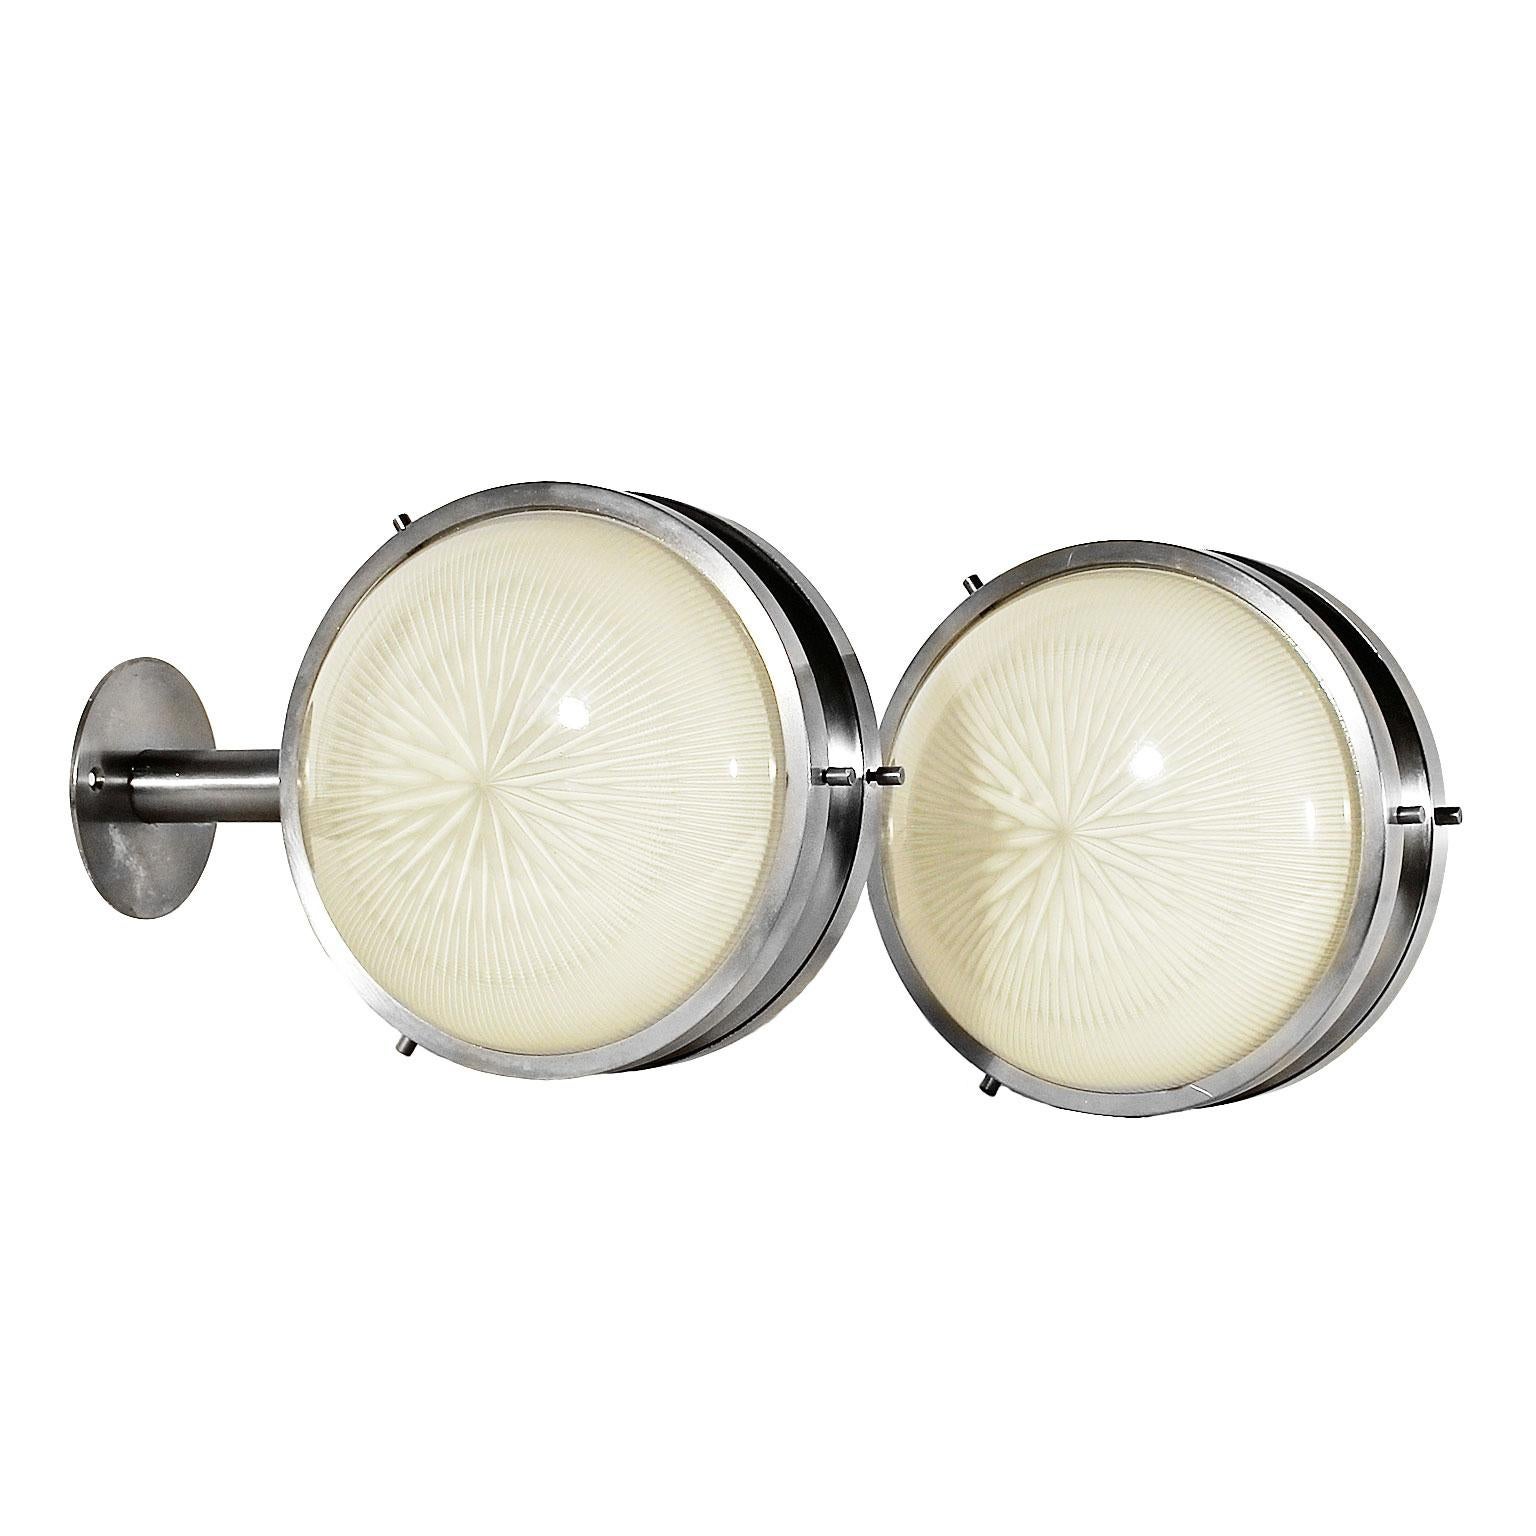 1960s Pair of Sigma Wall Lights by Sergio Mazza for Artemide Brass Glass, Italy